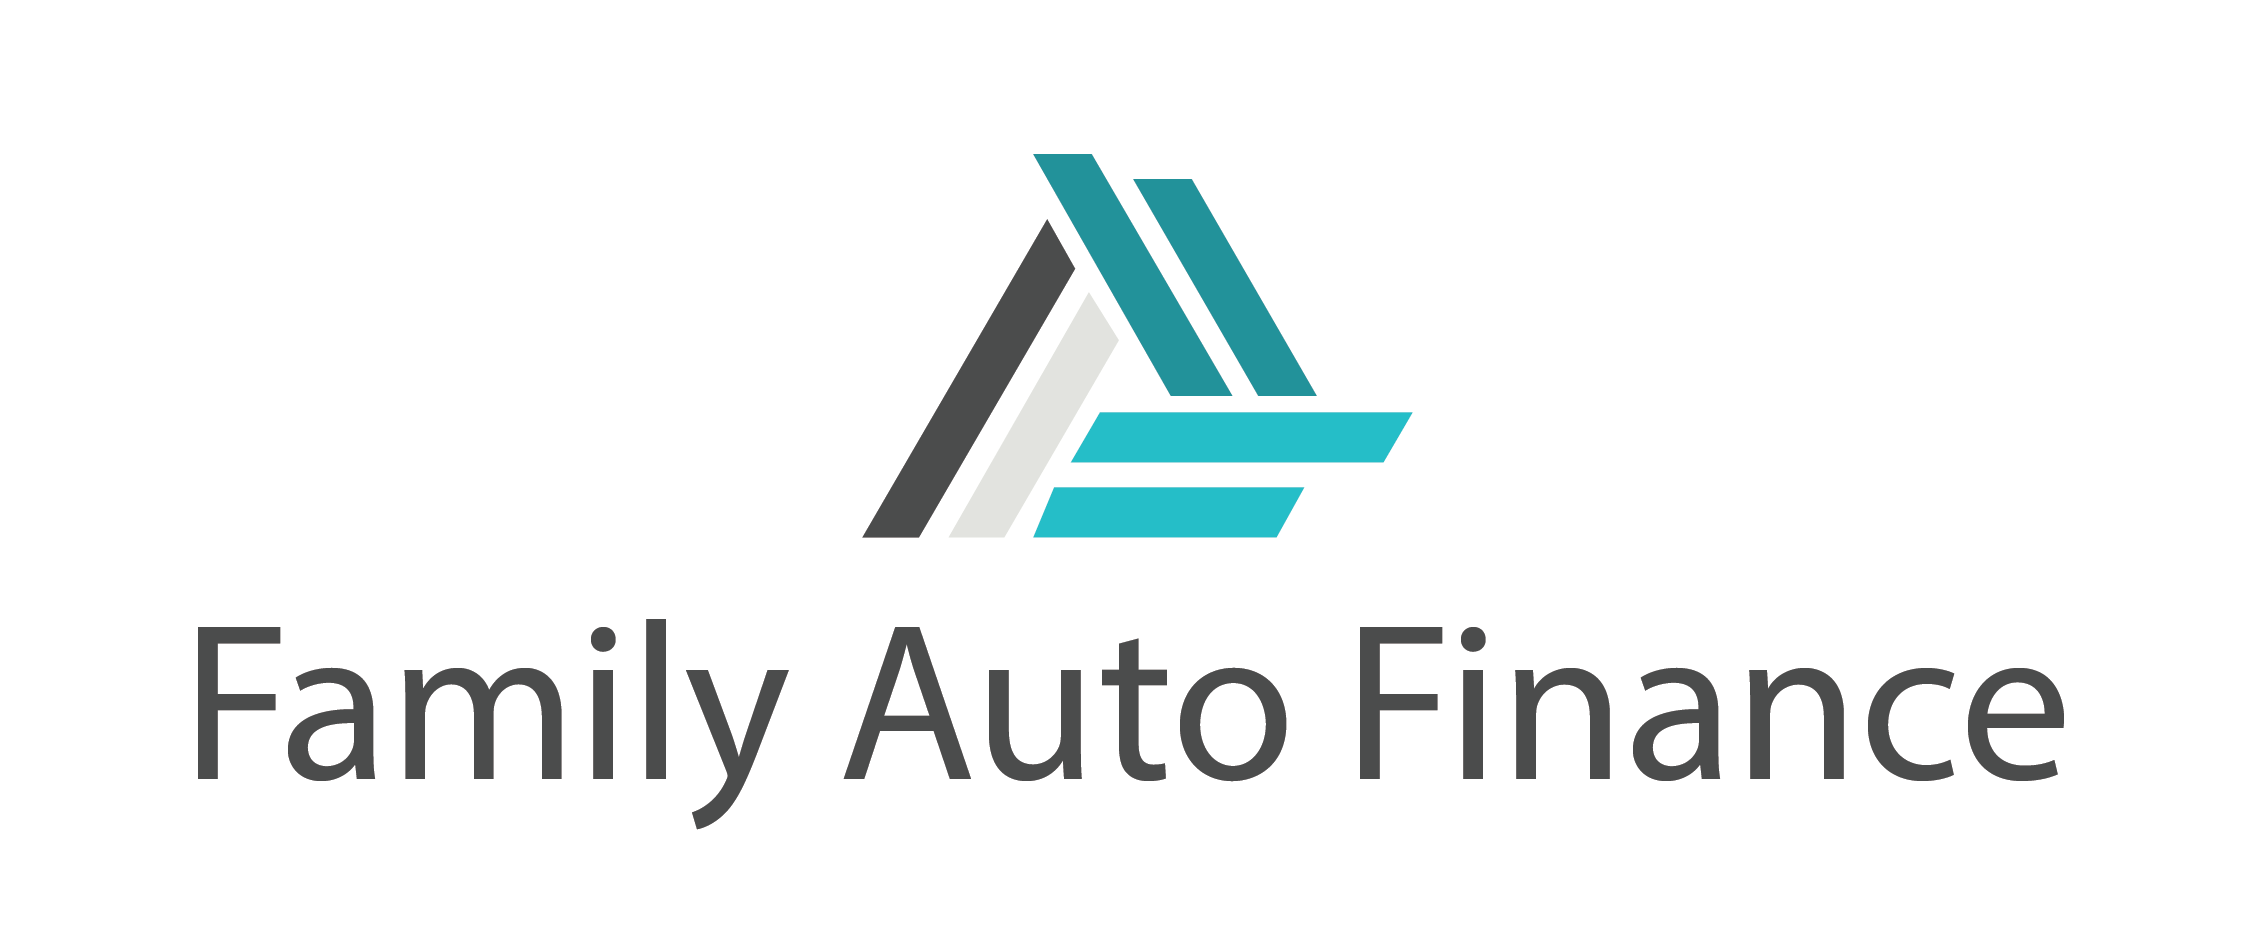 Connecting People with Automotive Financing